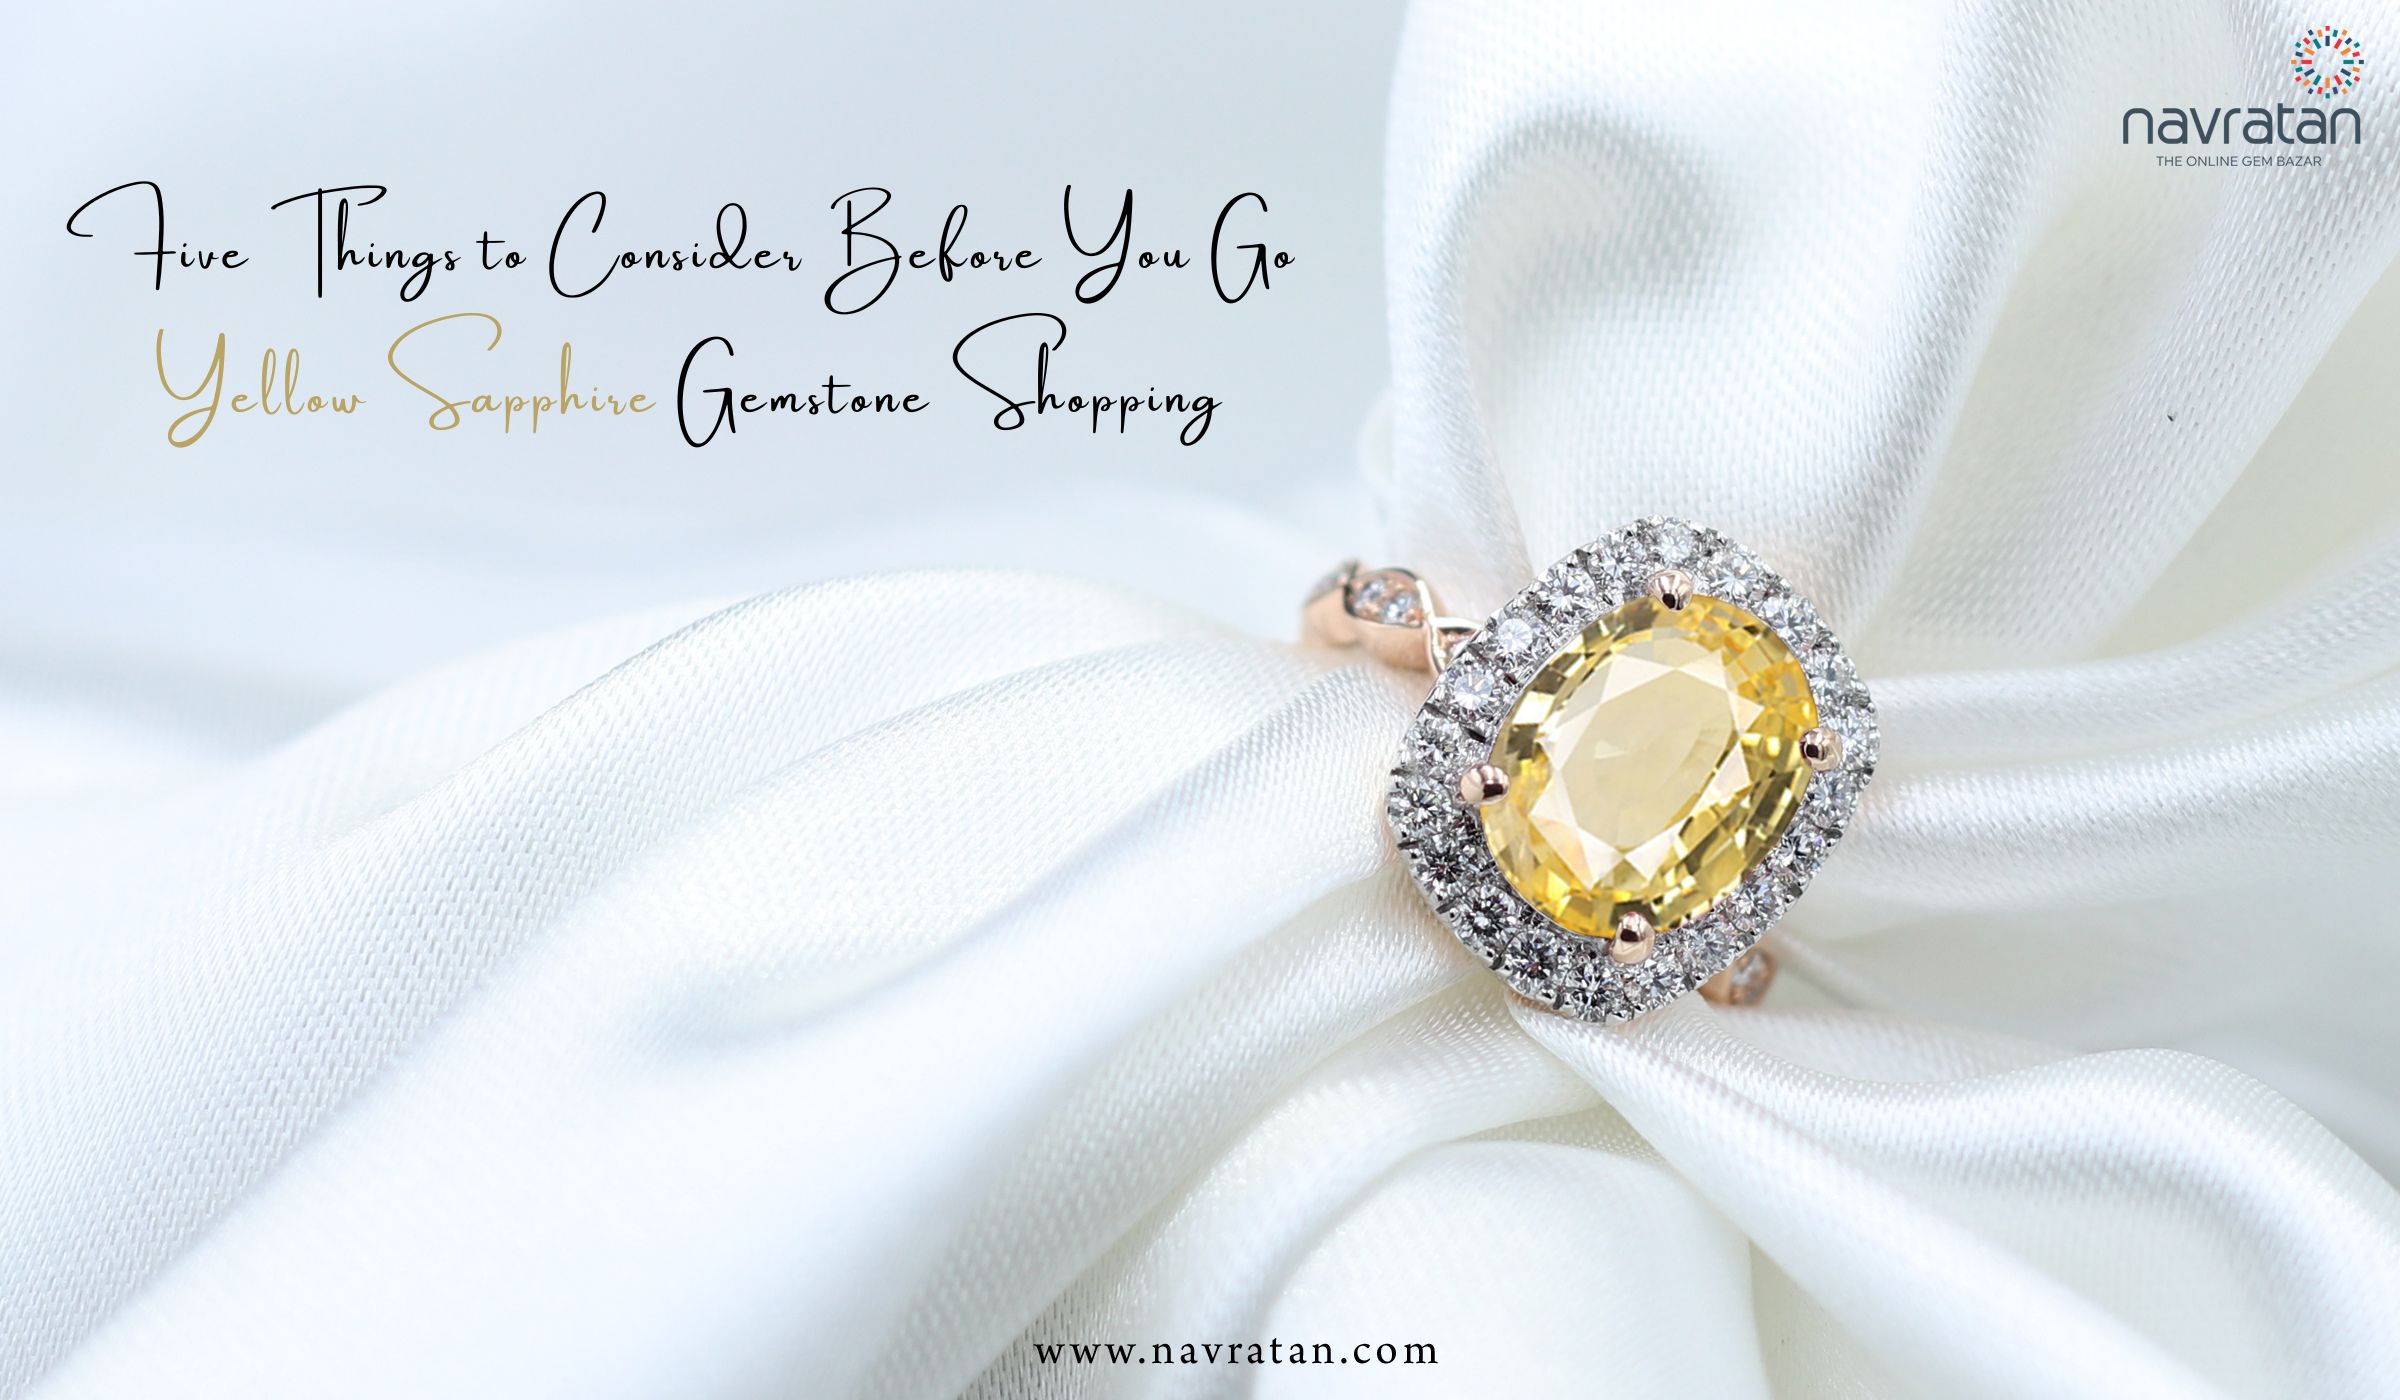 Five Things to Consider Before You Go Yellow Sapphire Gemstone Shopping